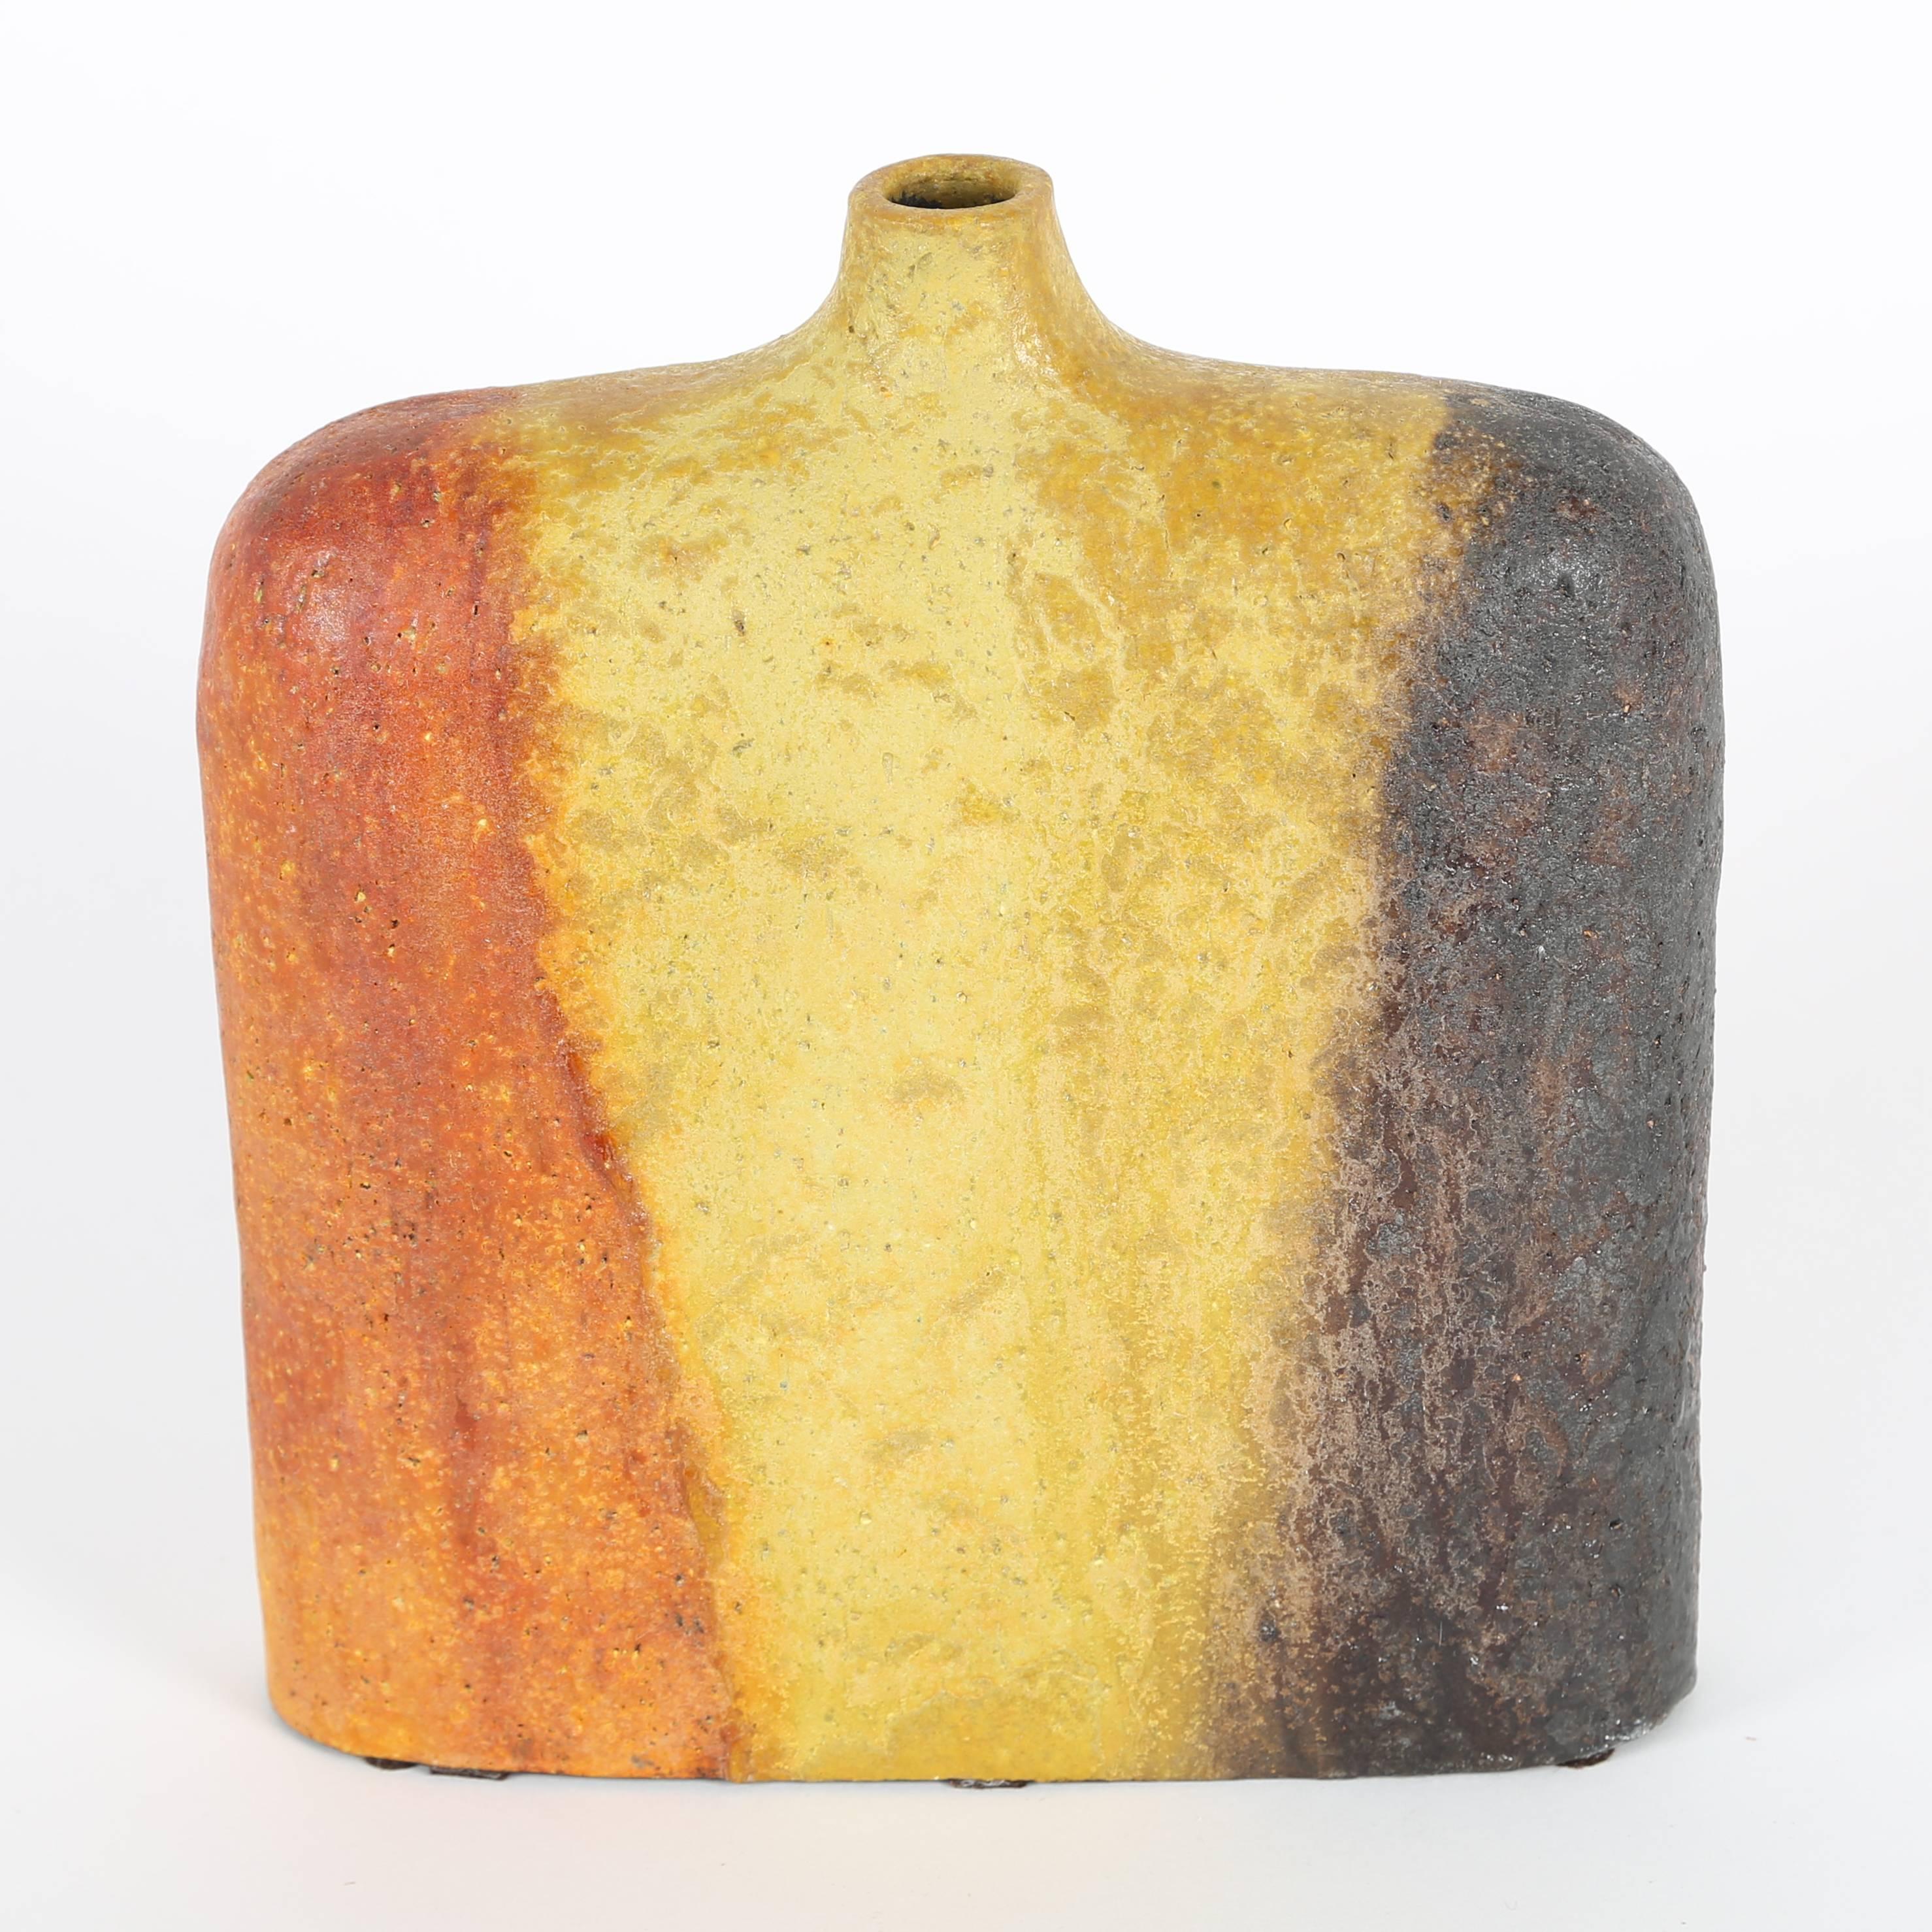 Large, 1960s Marcello Fantoni for Raymor vase with slender profile featuring bands of orange, yellow and brown with a thick and textured glaze. 